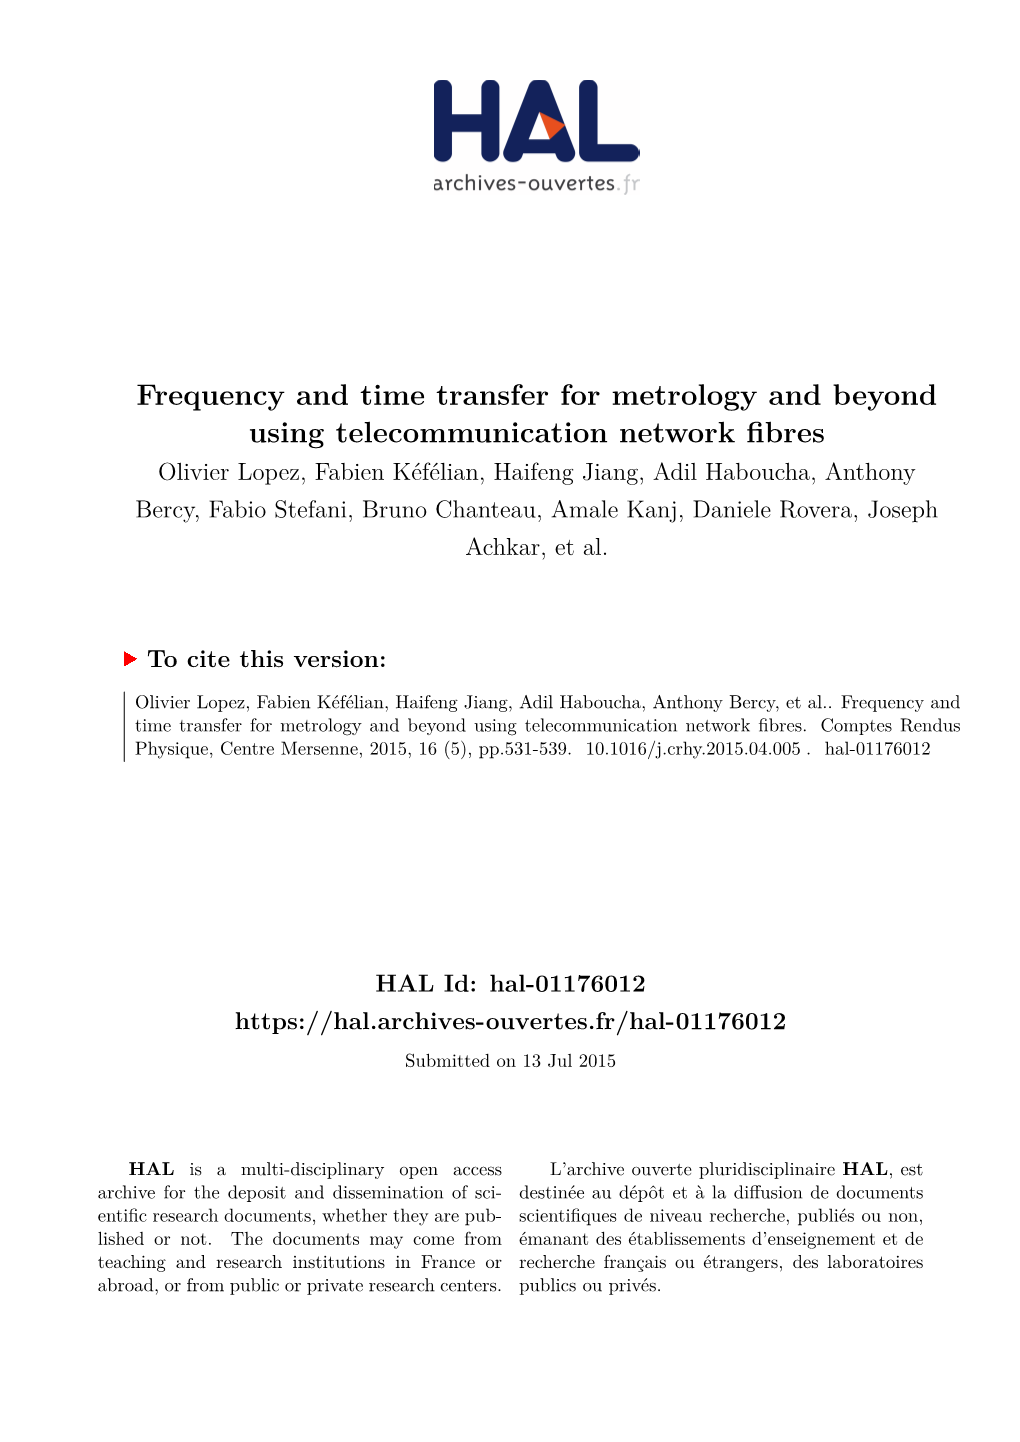 Frequency and Time Transfer for Metrology